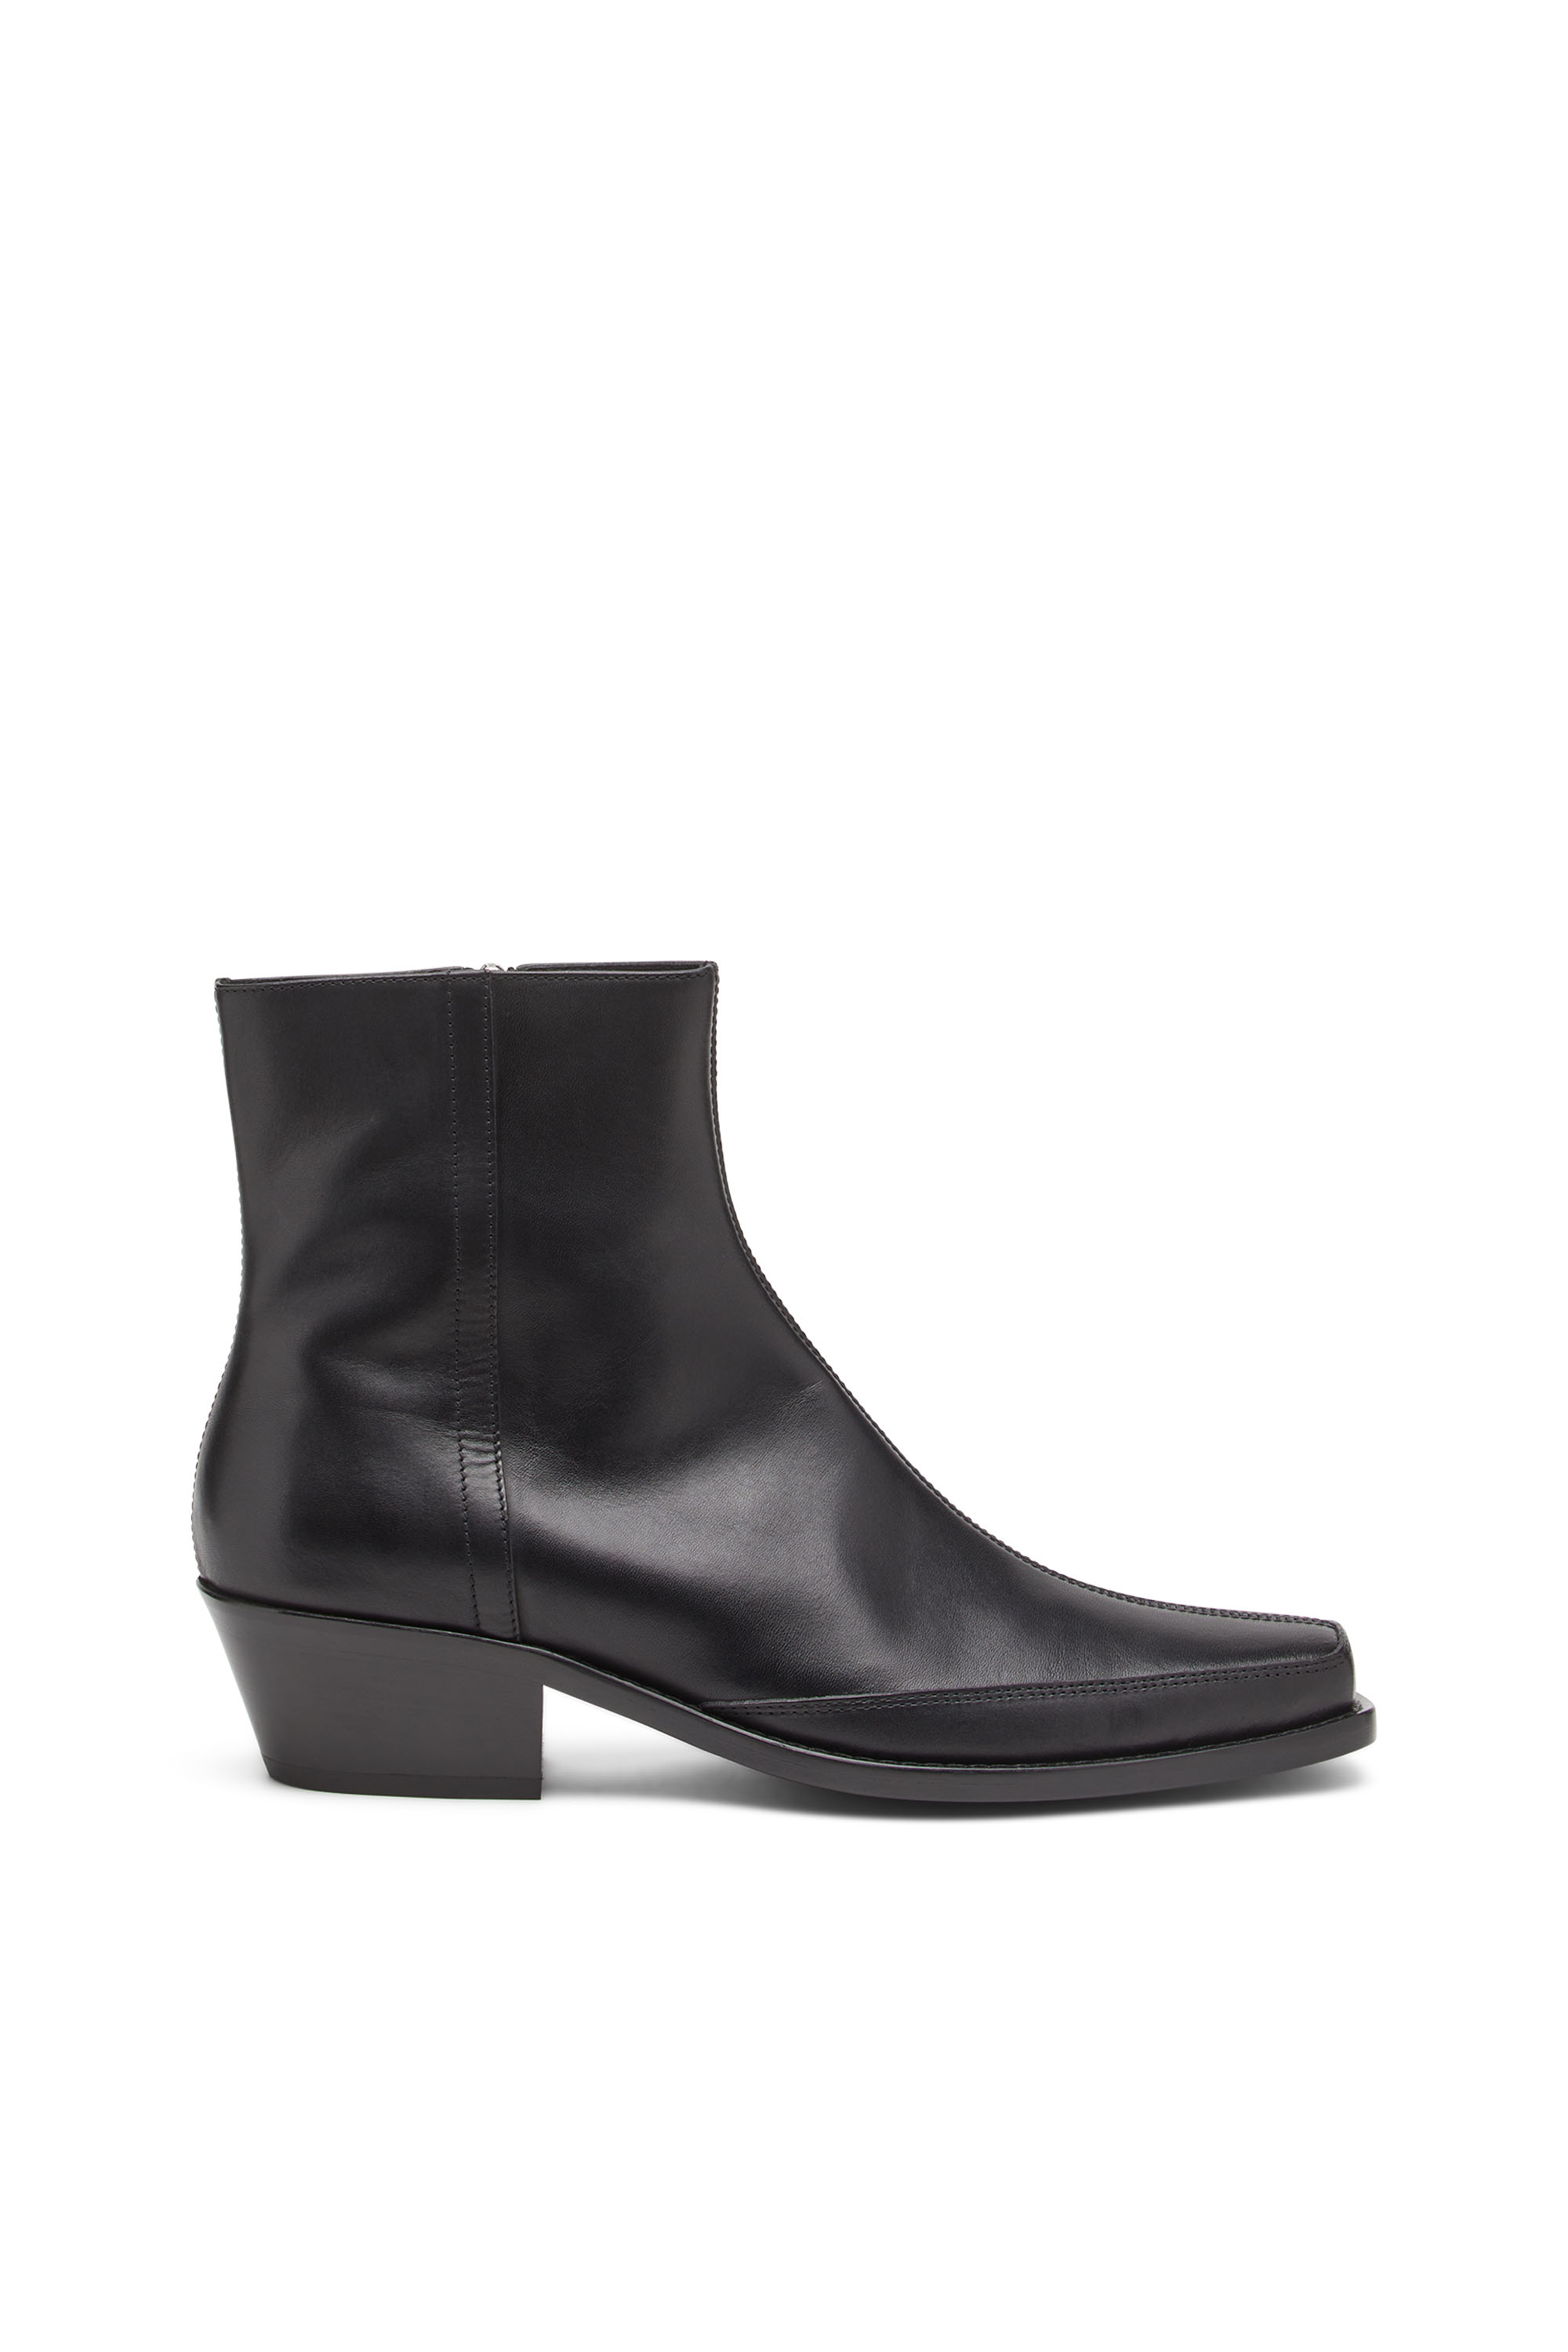 DIESEL SQUARE-TOE LEATHER ANKLE BOOTS